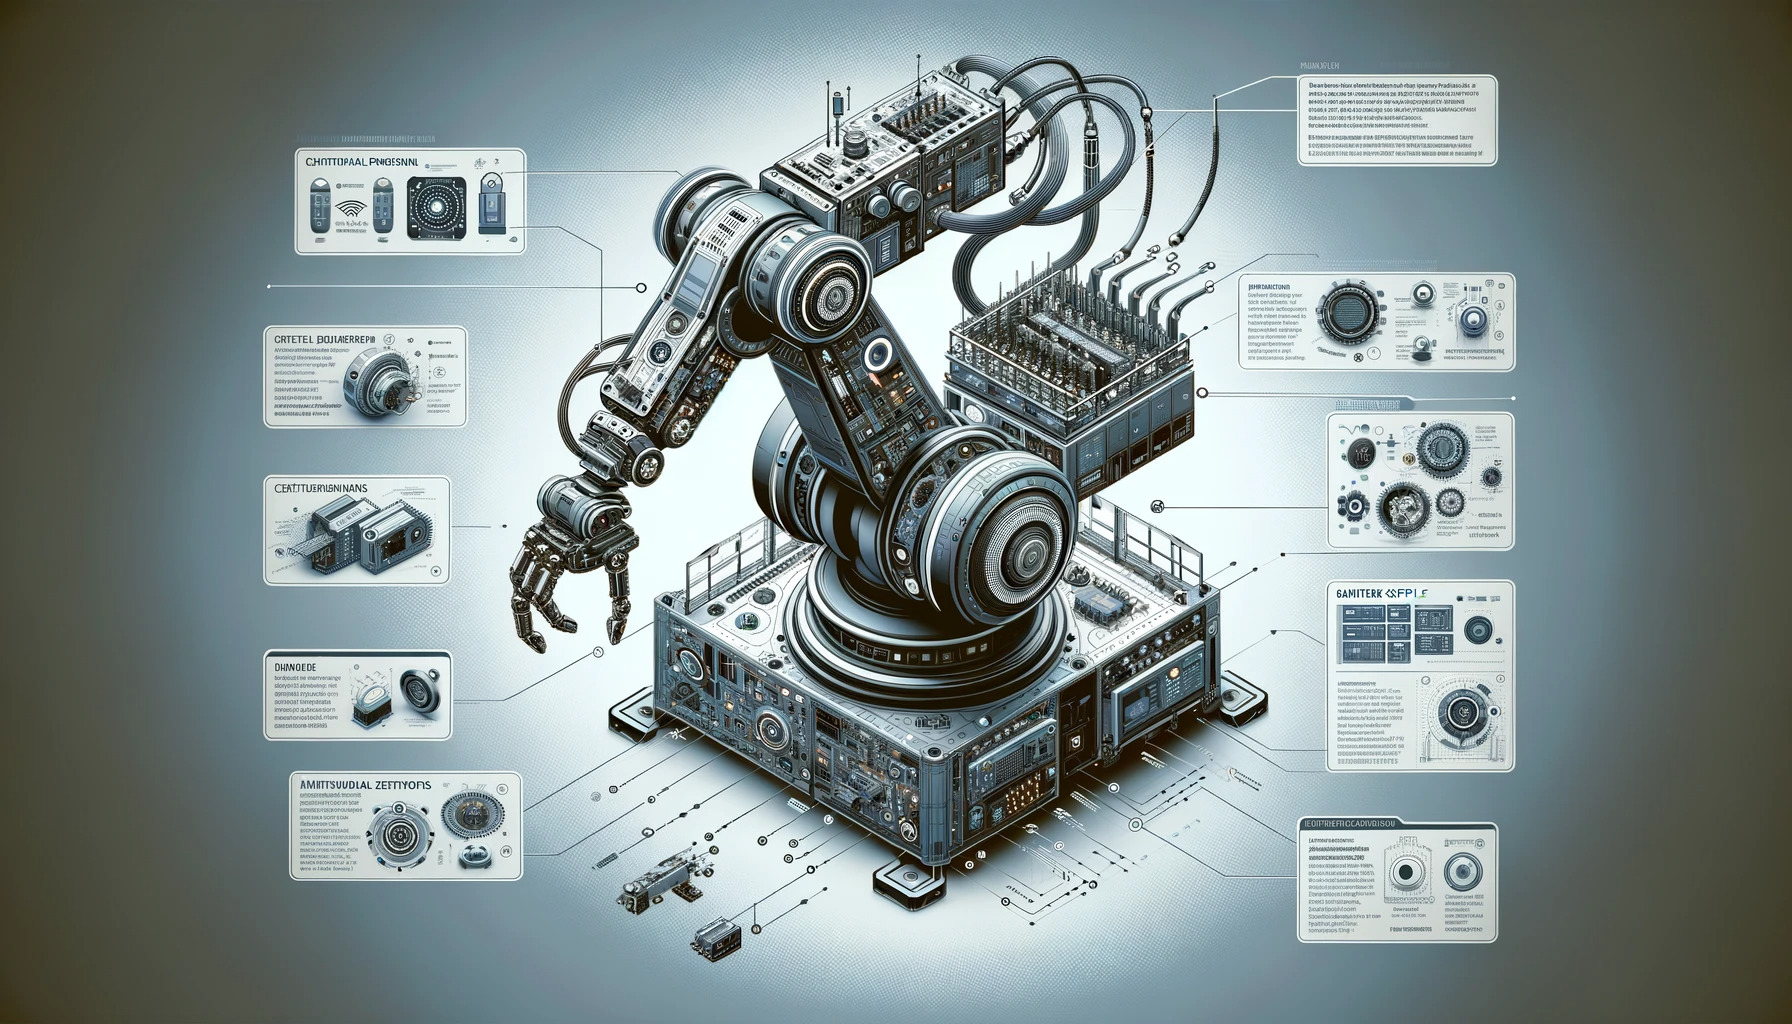 Main Components of an Industrial Robot